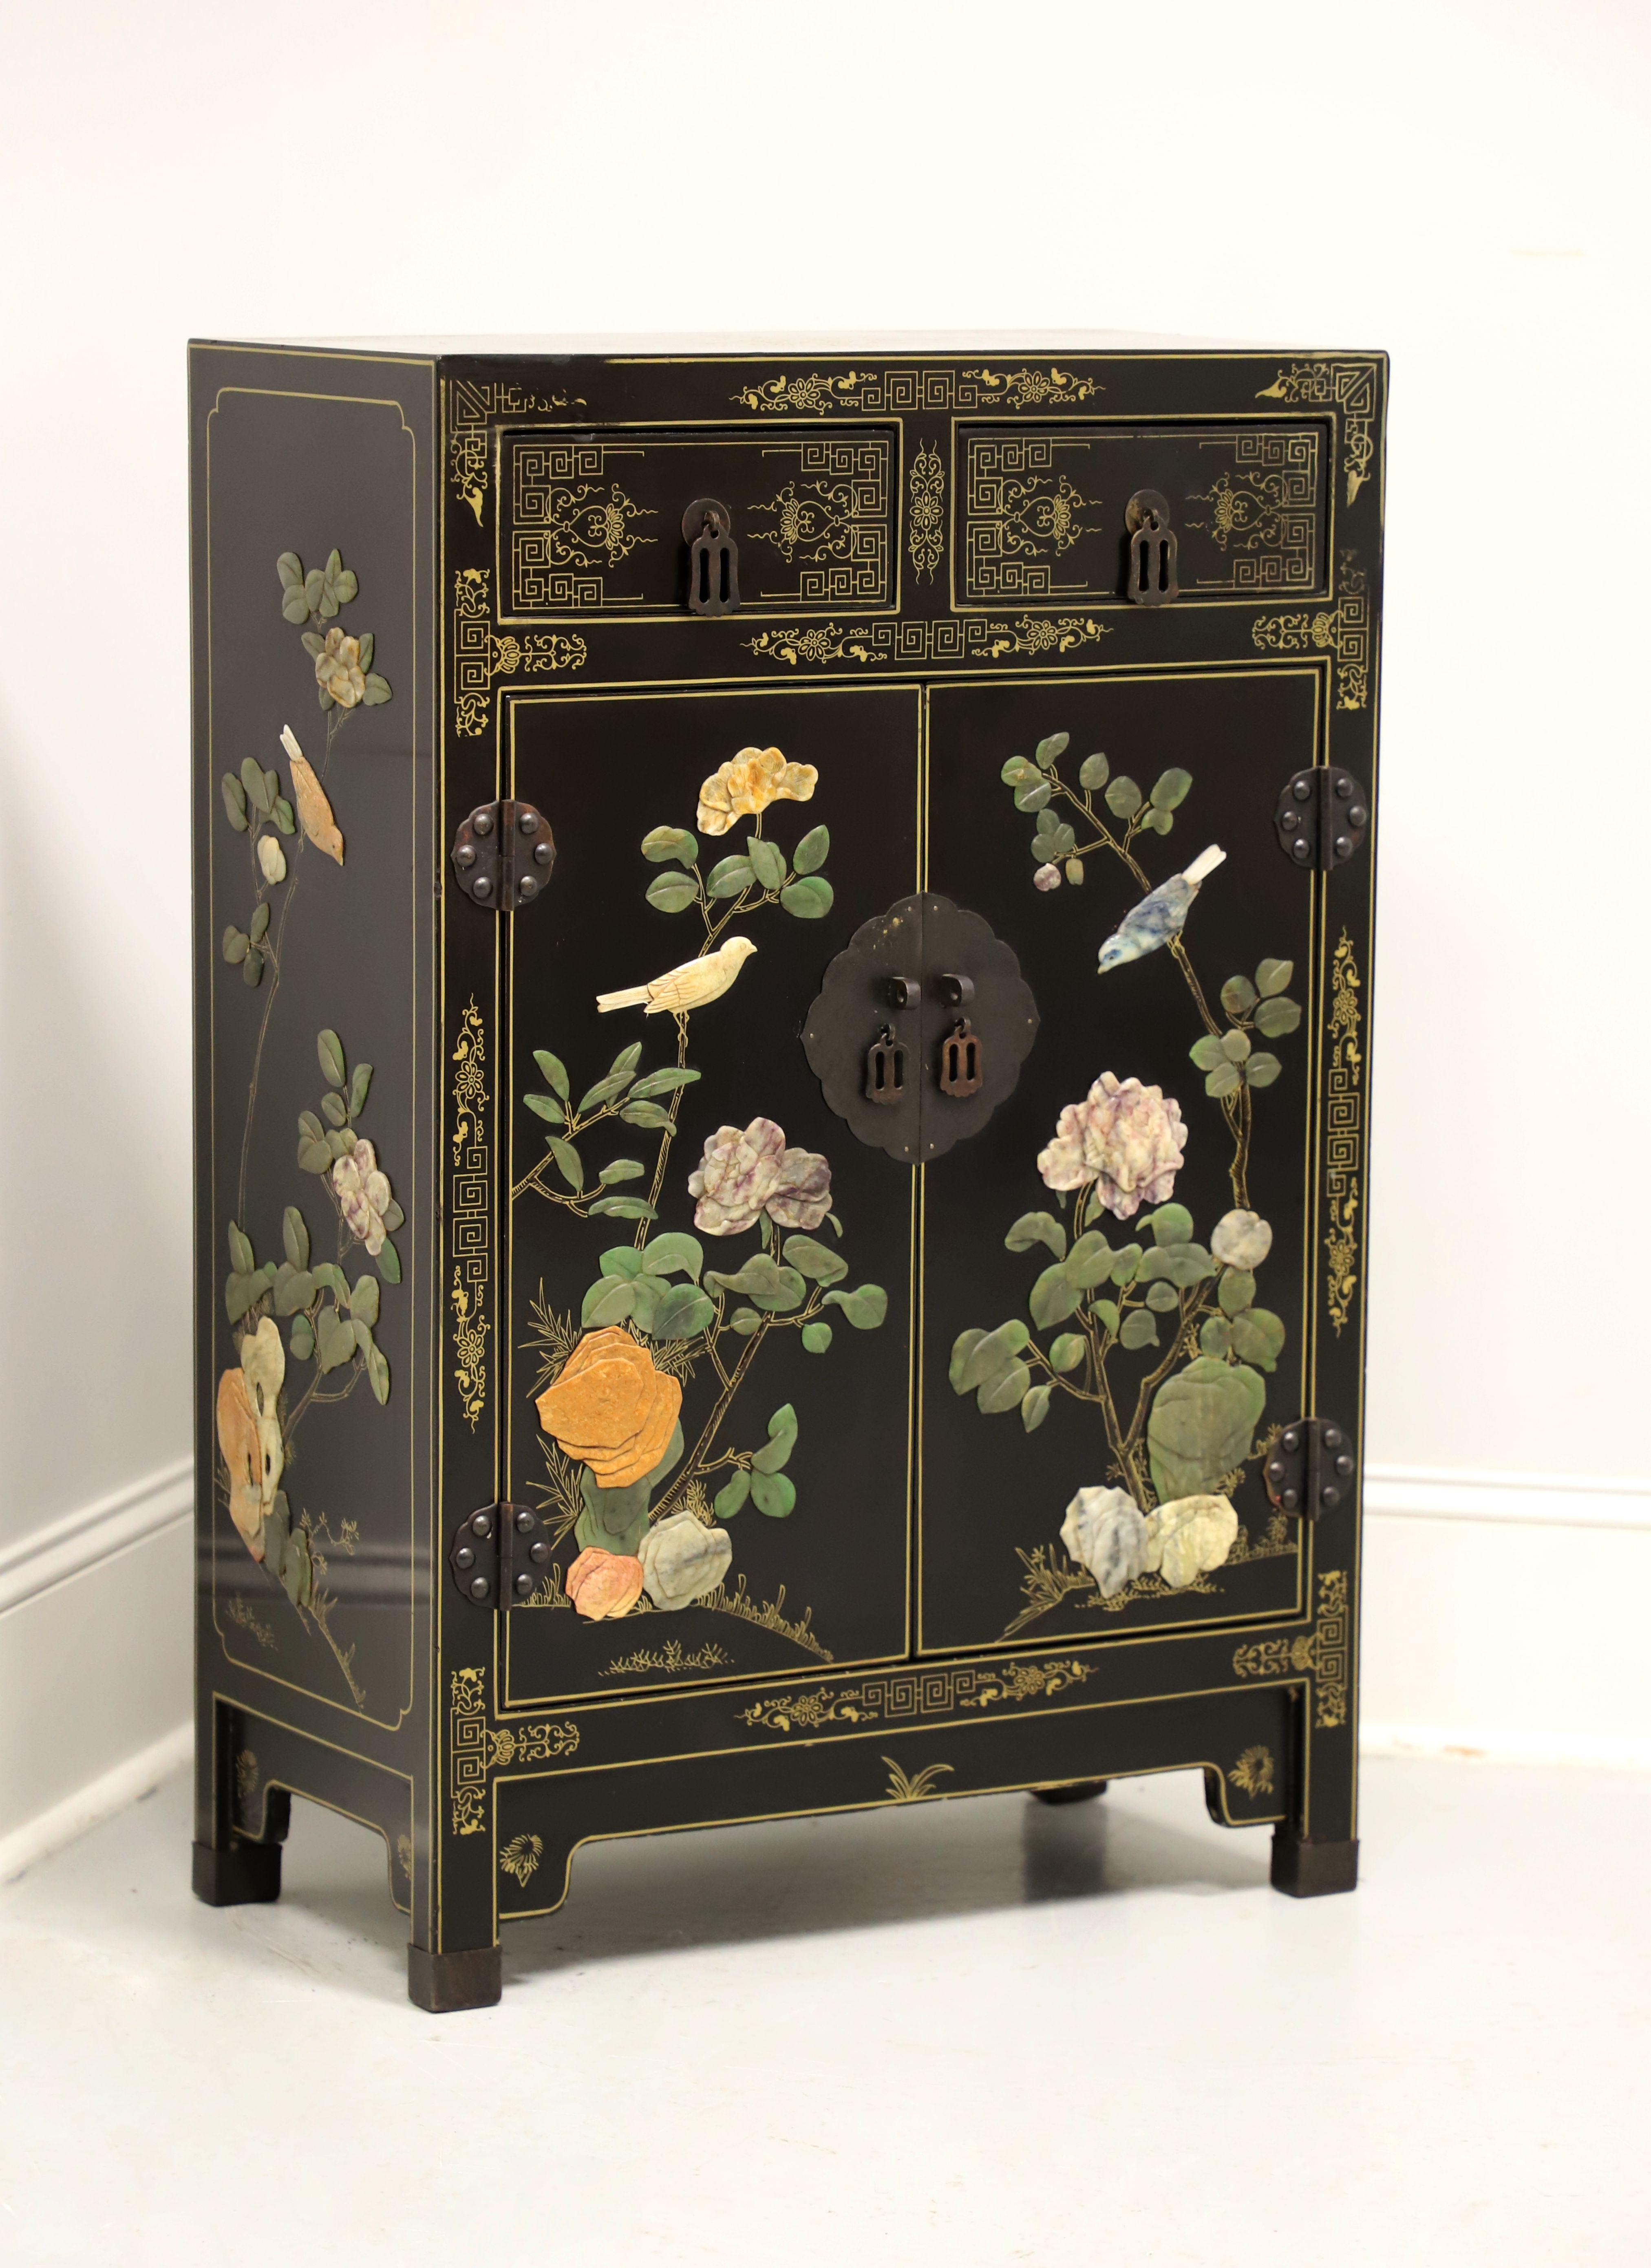 A vintage Asian Chinoiserie style console cabinet by Jinlong. Solid wood with black lacquer, gold painted Chinoiserie pattern to the top, front & drawer fronts, painted gold string inlays, soapstone florals to door fronts, brass hardware, carved